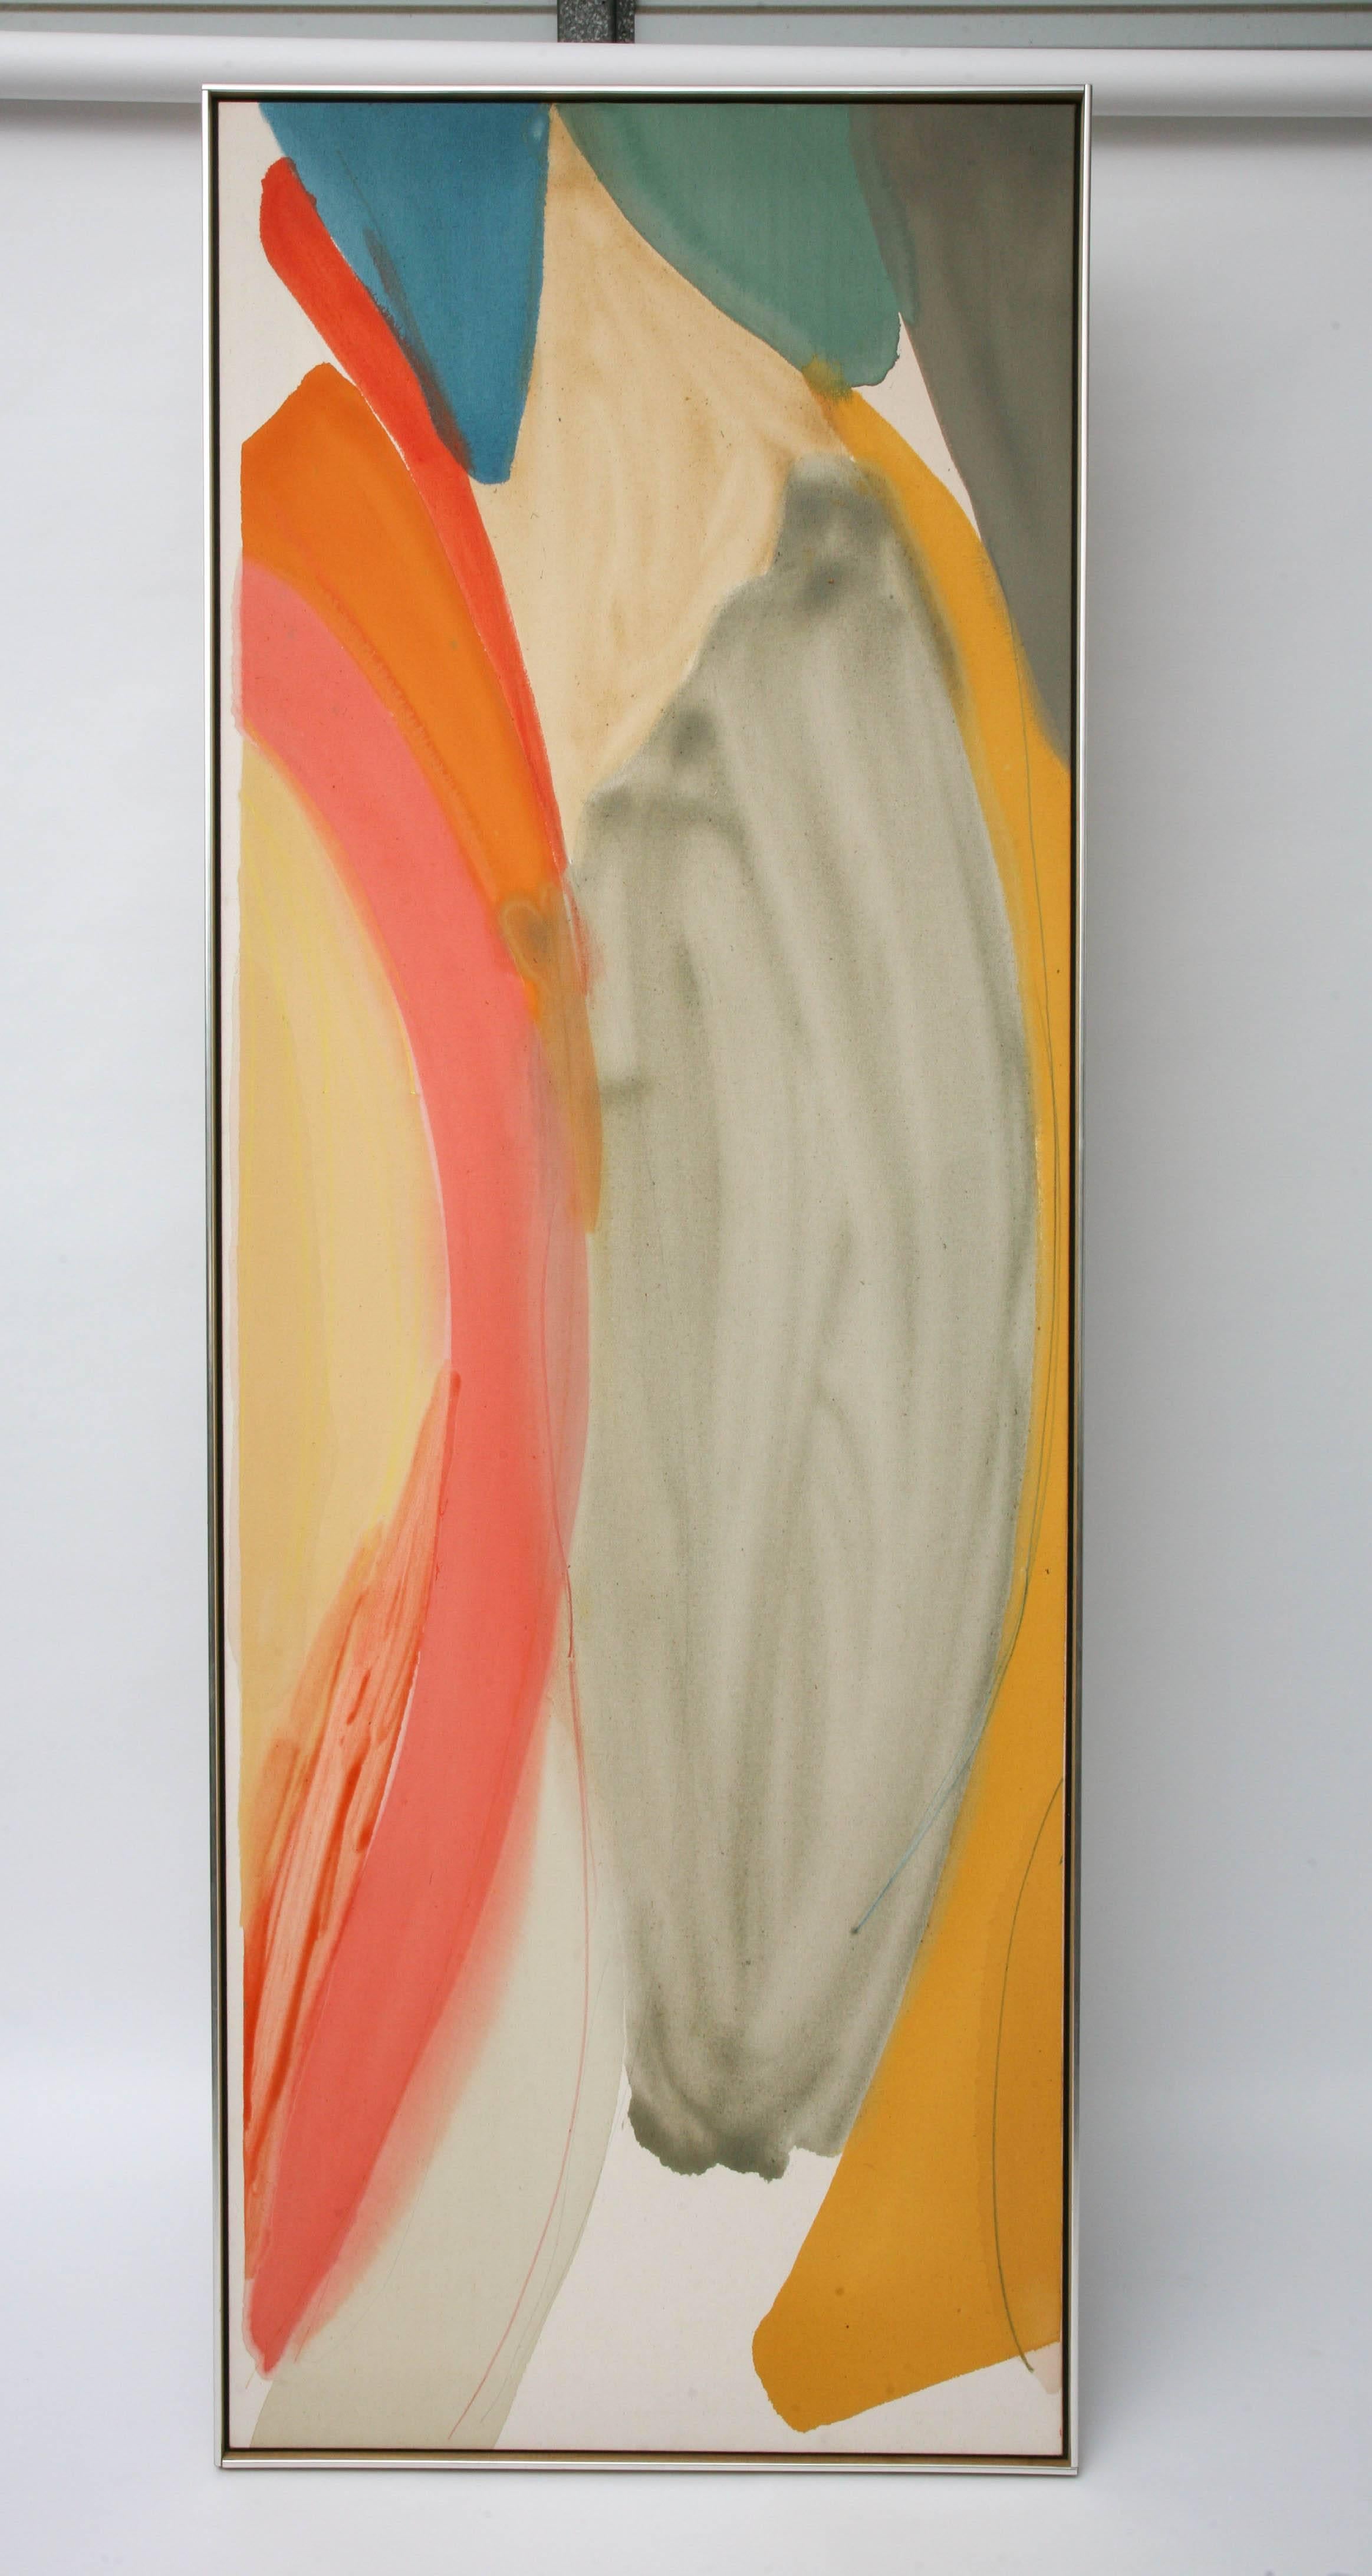 Large 94" H Larry Zox painting.
Signed on the back with a Hokin Gallery label.
Title: "Crescent."